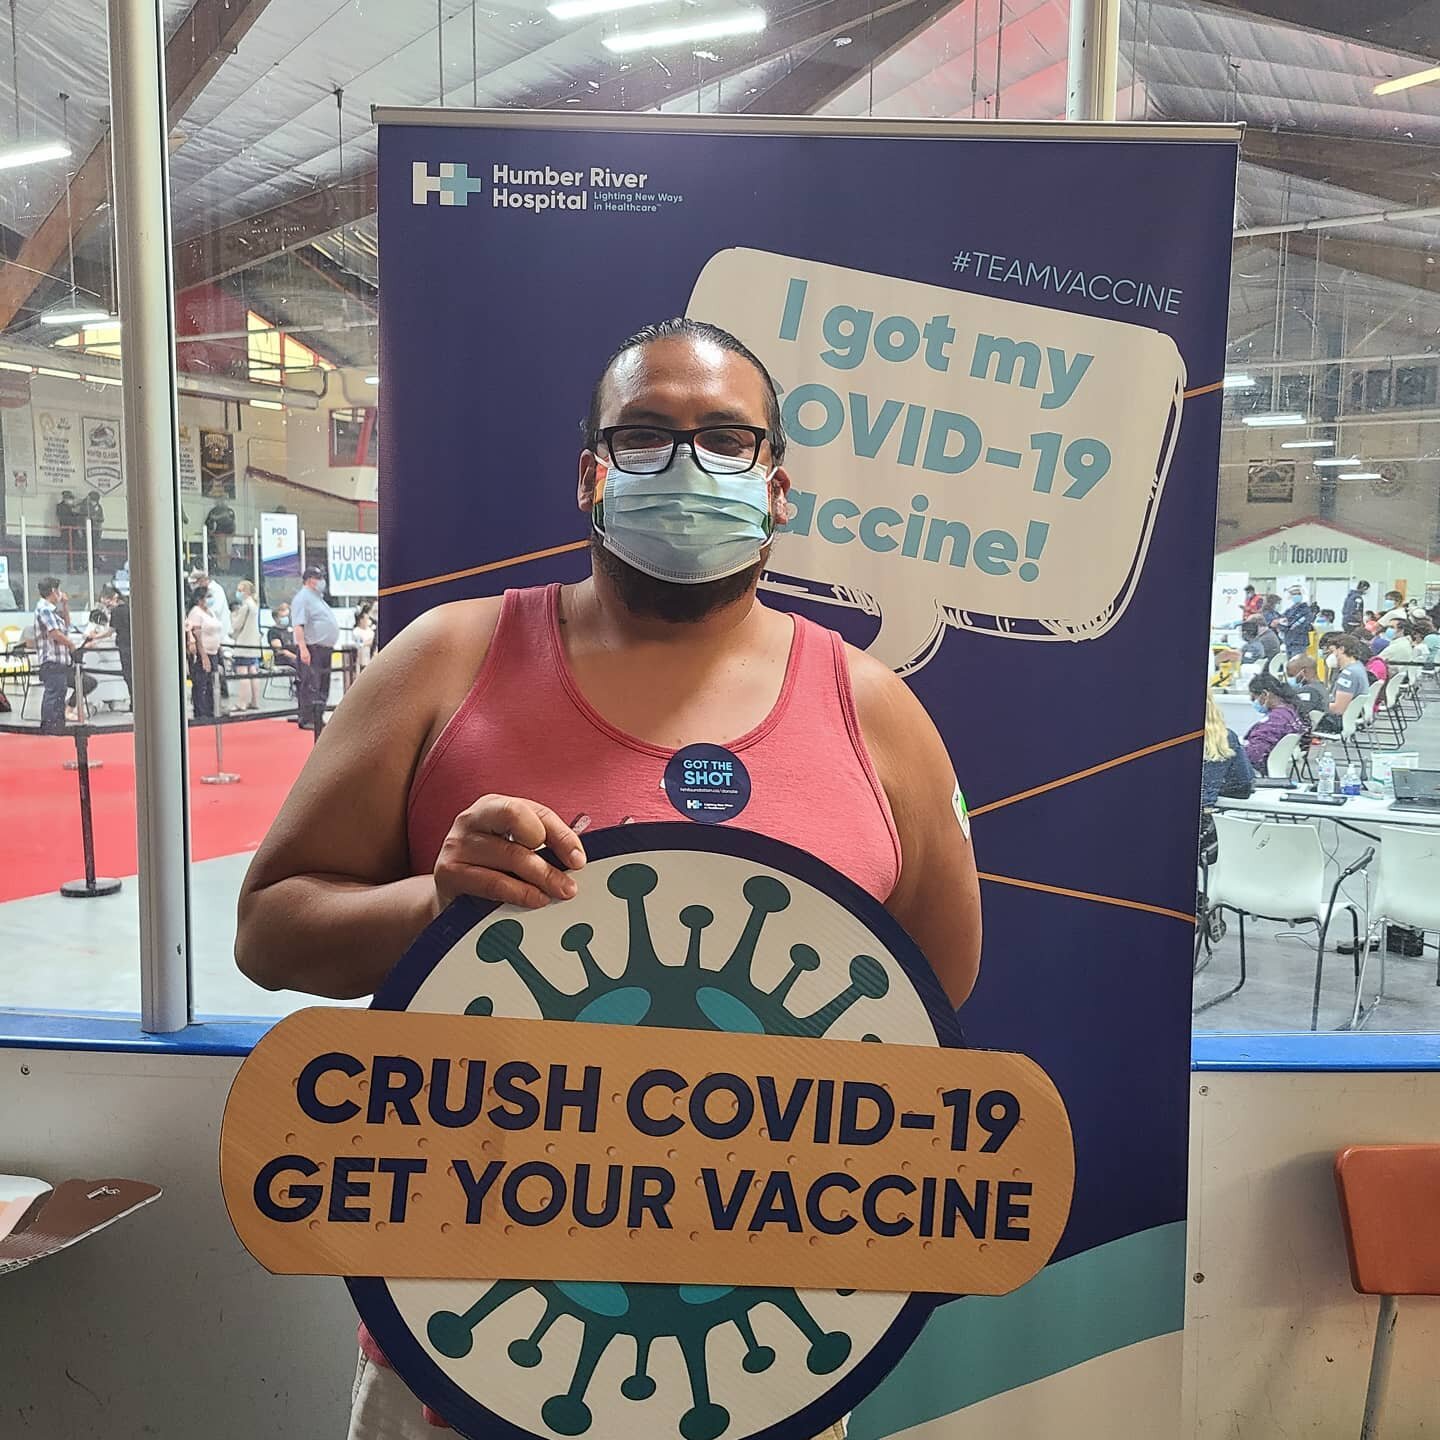 Pfeeling great, pfeeling pfine! 

It was so great seeing so many people out getting their #covidvacccine today at the @hrhospital pop up clinic, all of them getting us one step closer to #beatcovid19 ! 

Of course, I couldn't help but notice behaviou